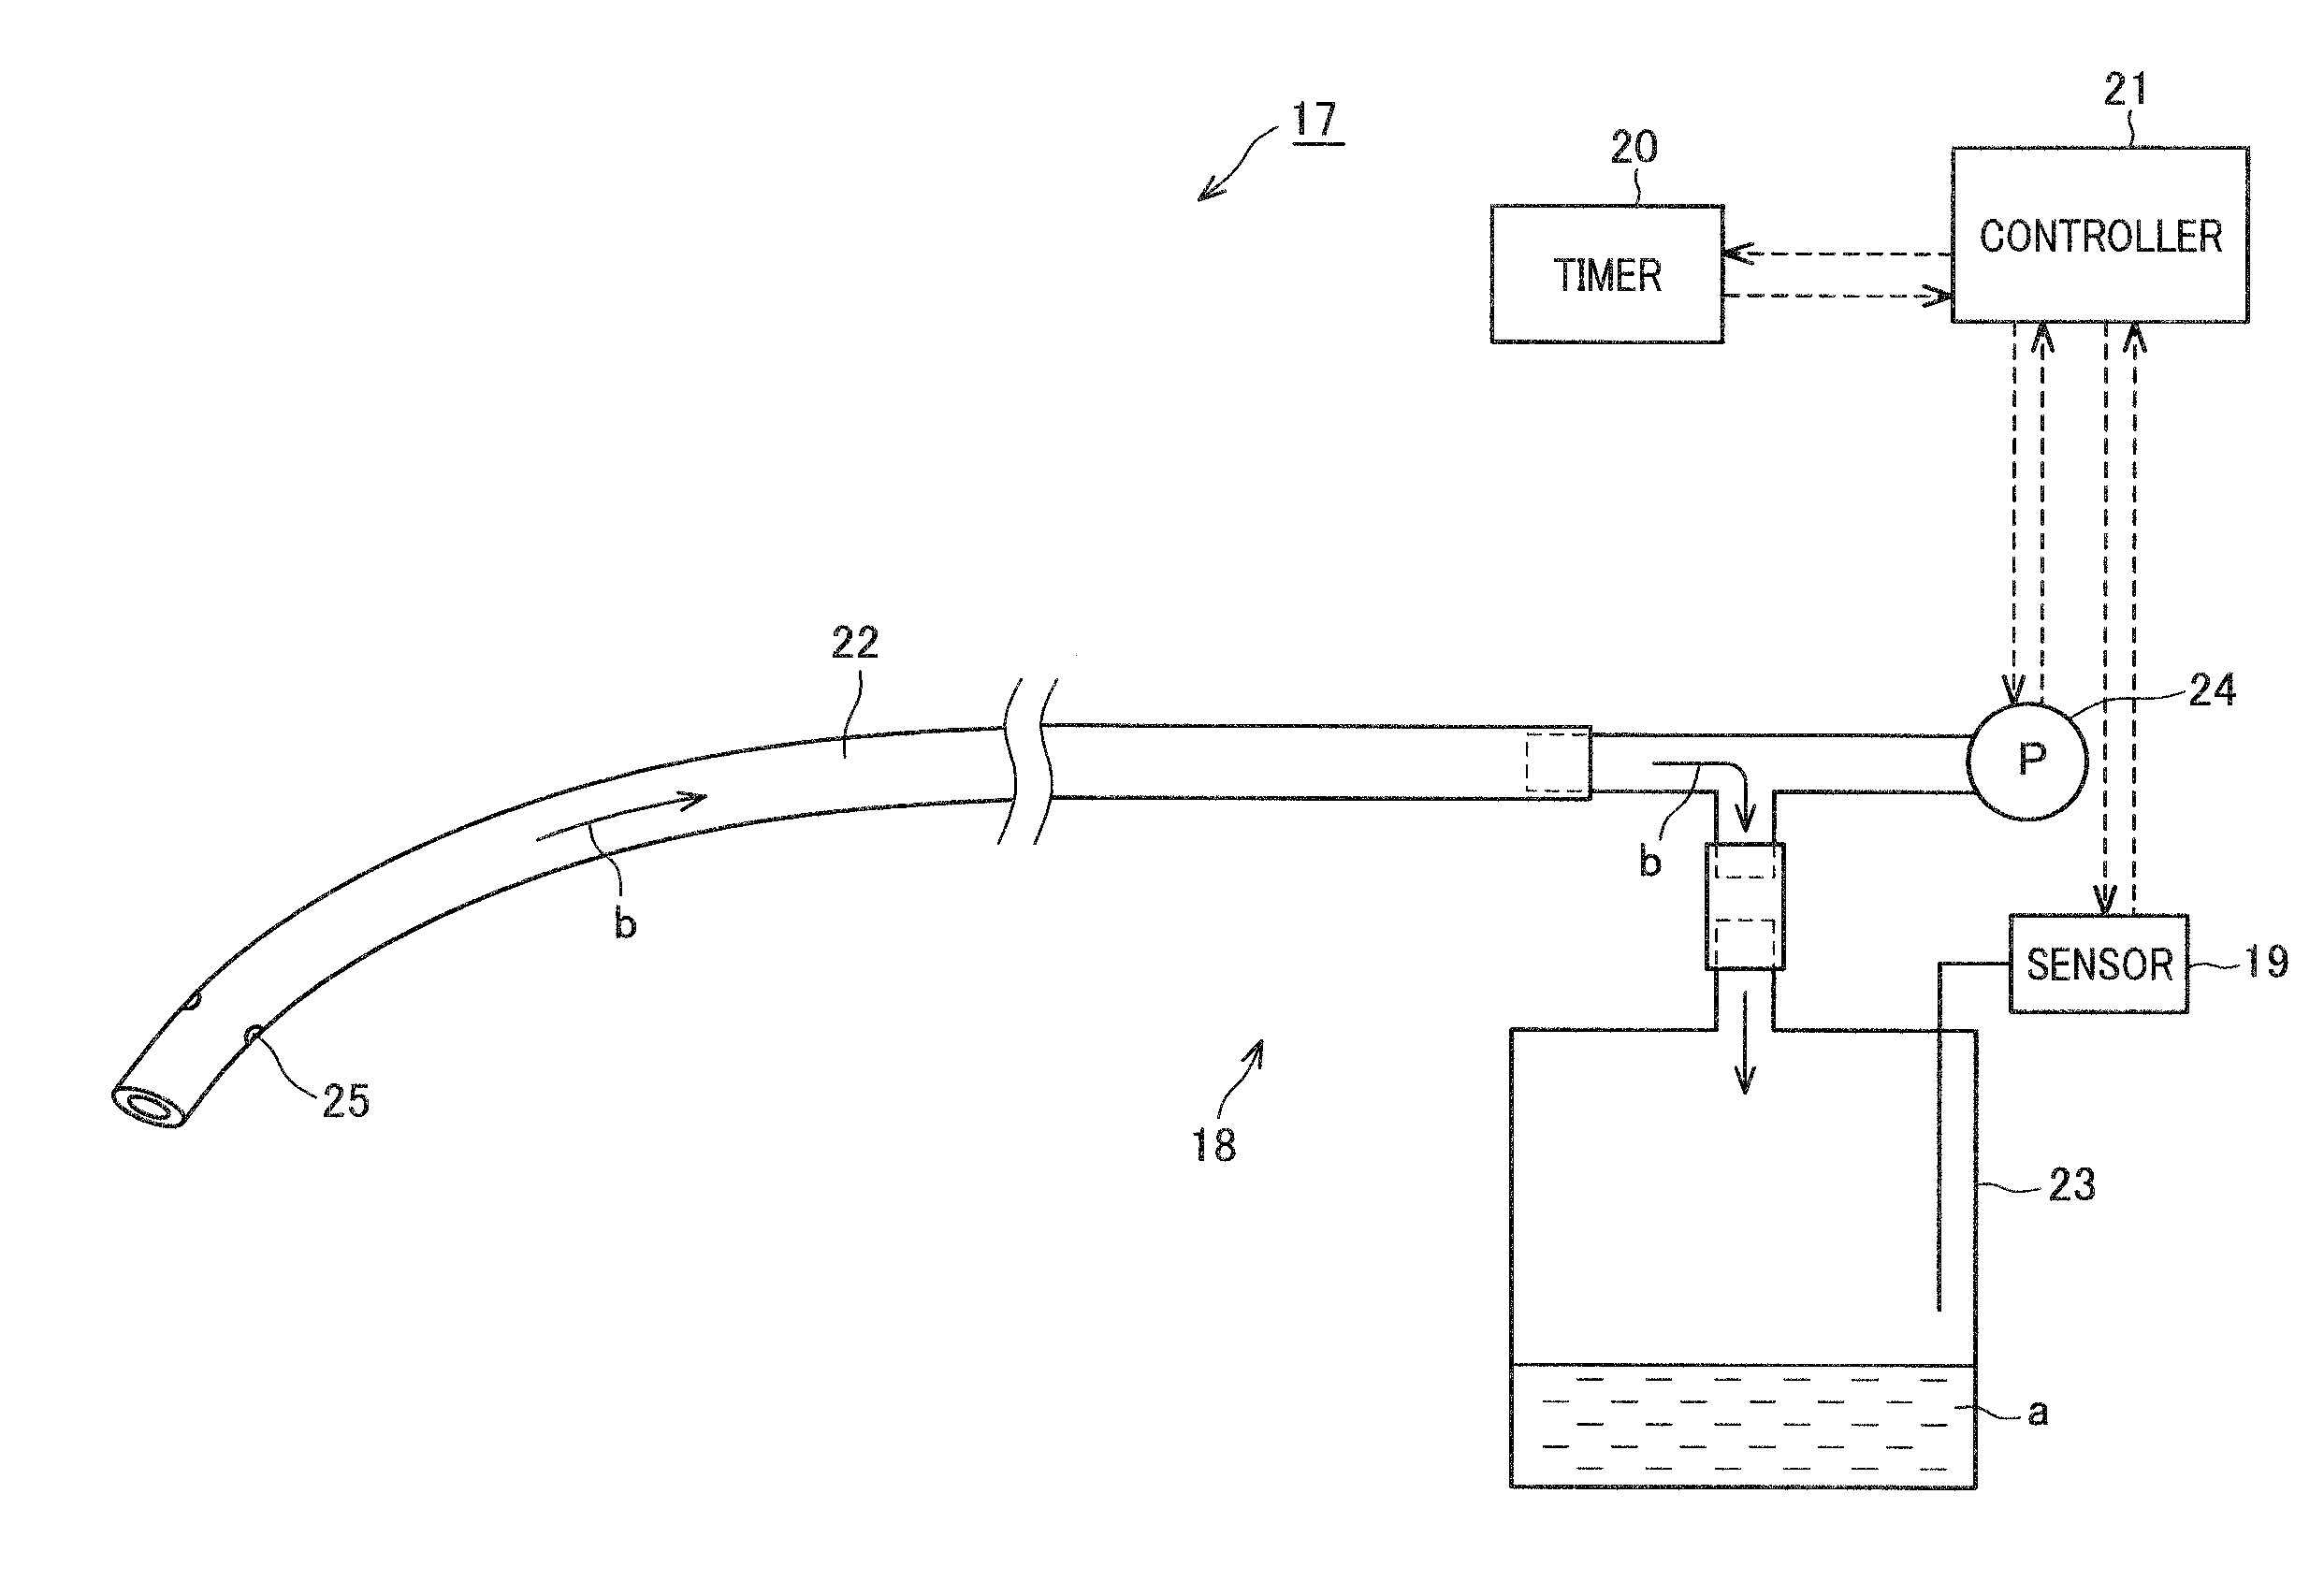 Method of collecting specimen and method of diagnosing subject to detect upper digestive system disease